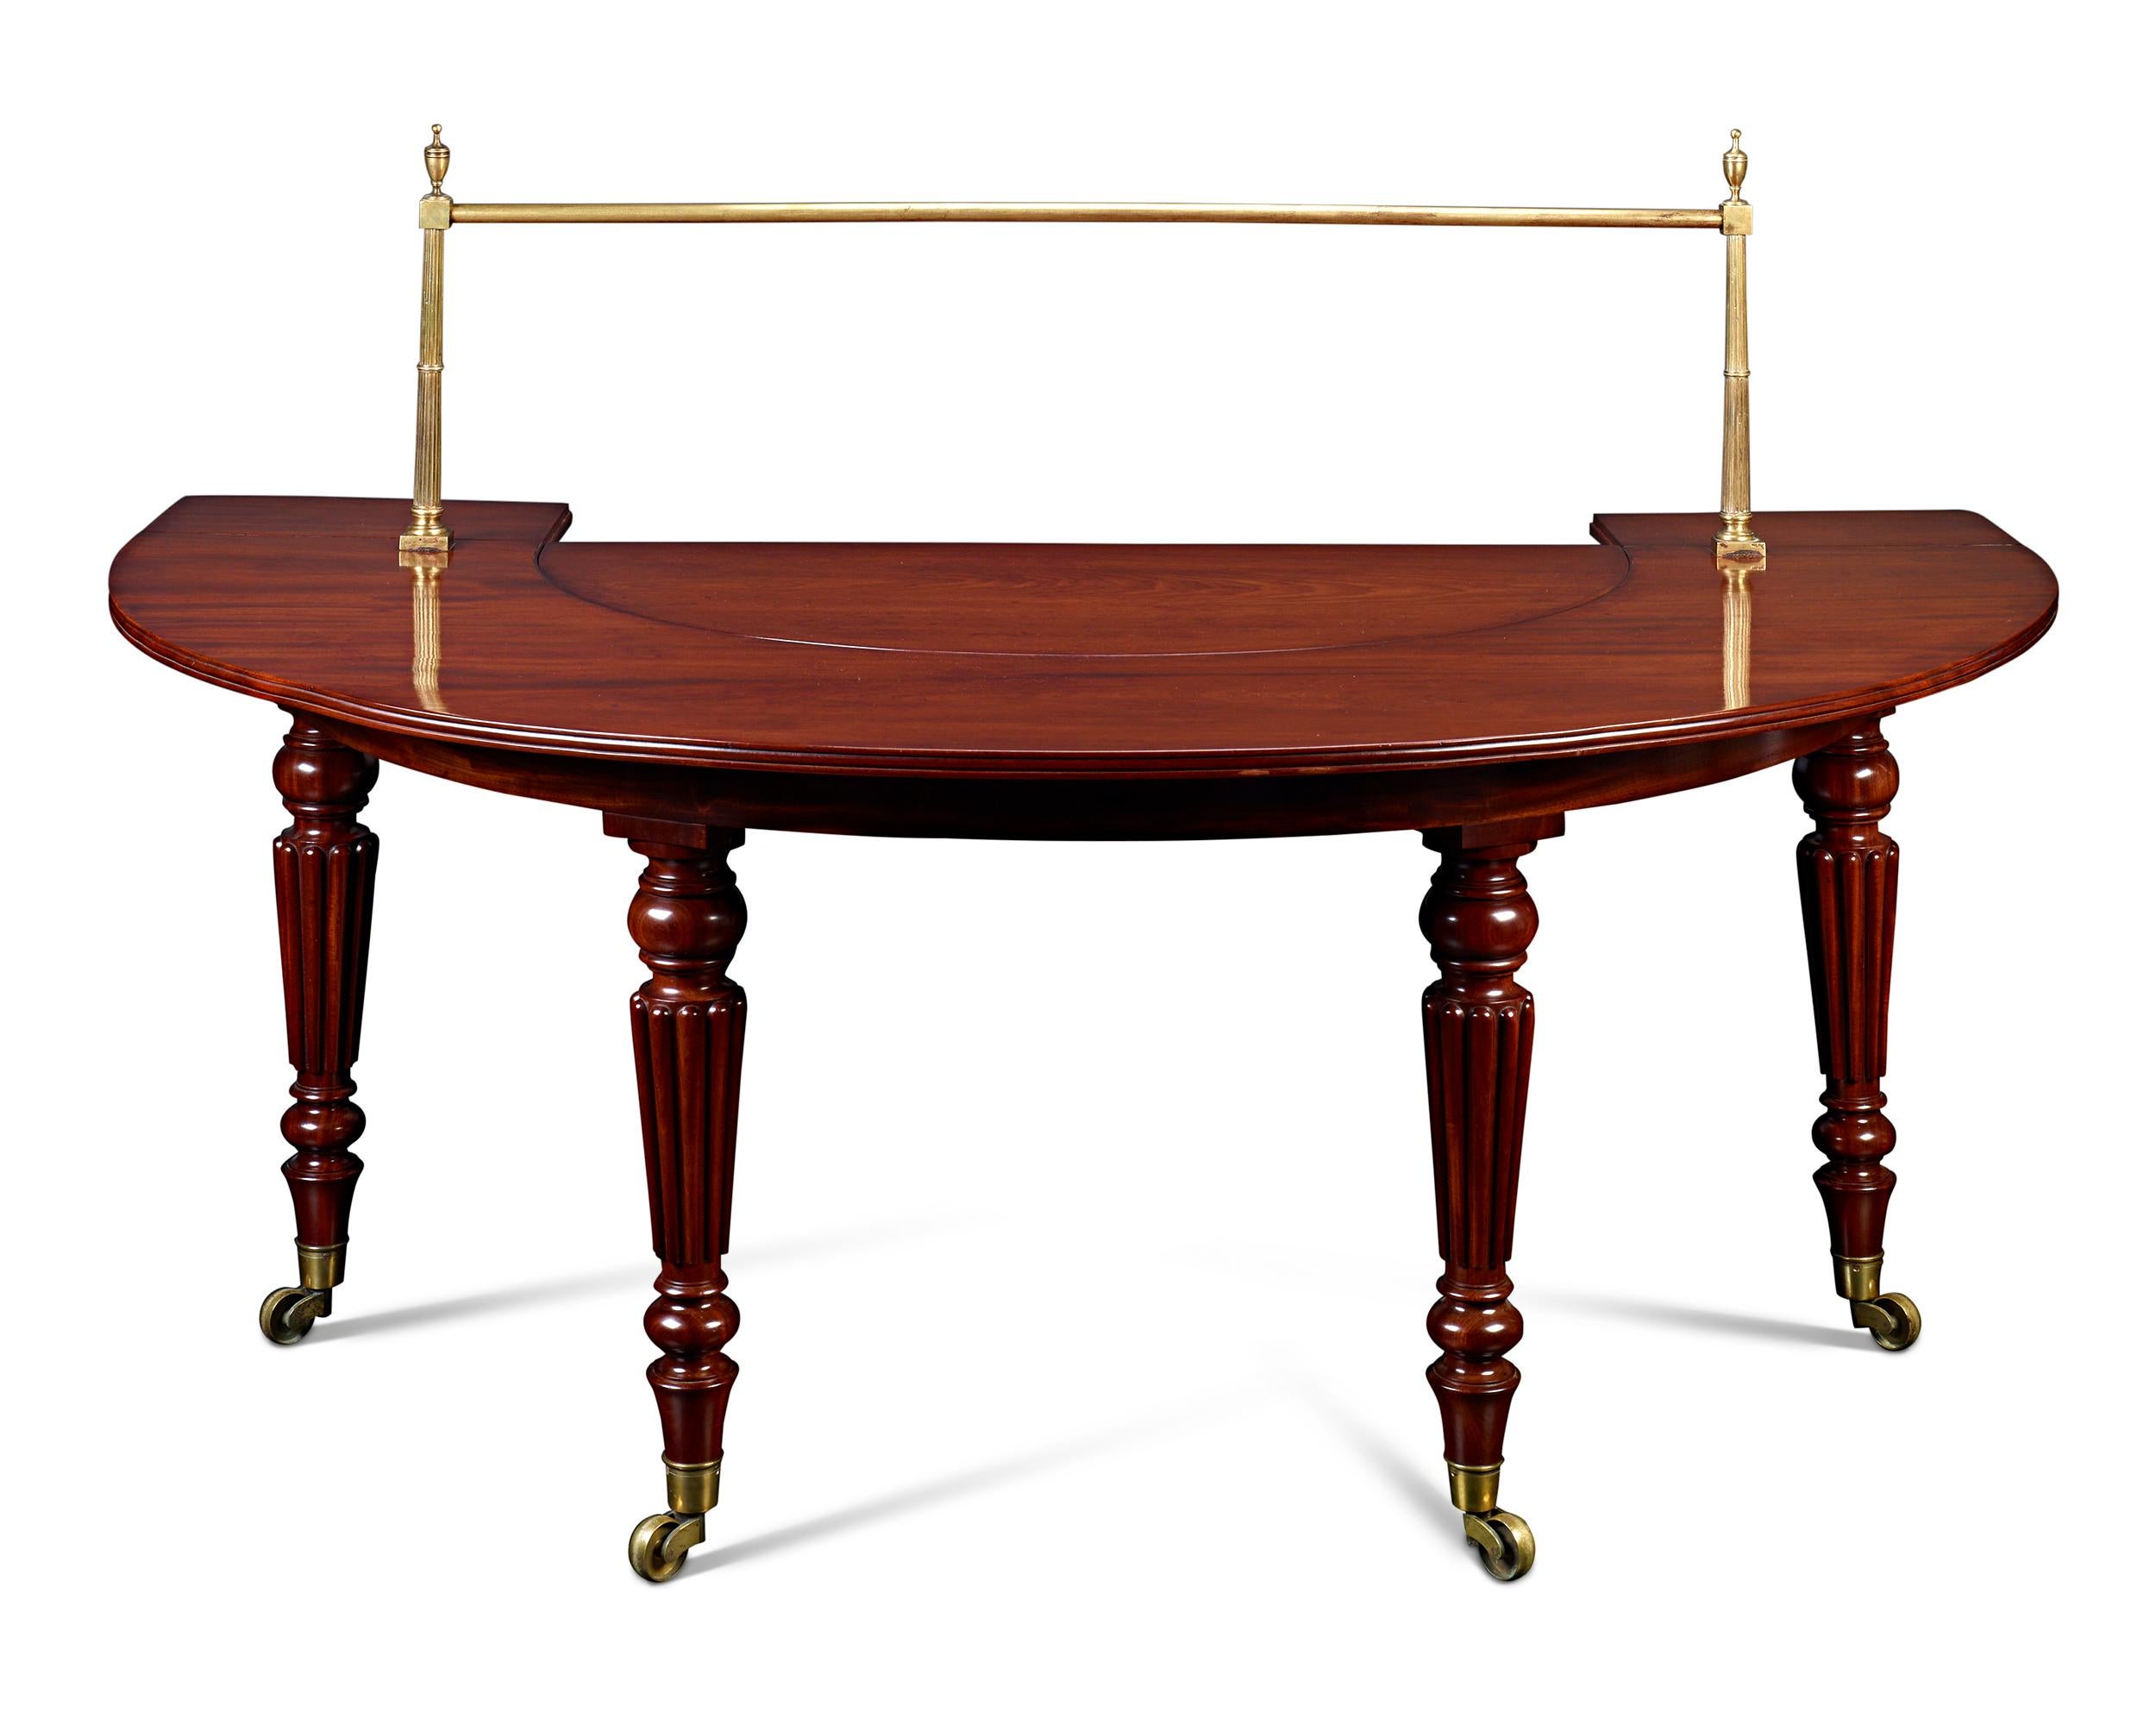 Perfectly proportioned and beautifully crafted, this rare hunt table is an exceptional example of Regency-period cabinetmaking. Also known as a social table, this horseshoe-shaped furnishing was specially designed for serving beverages during a